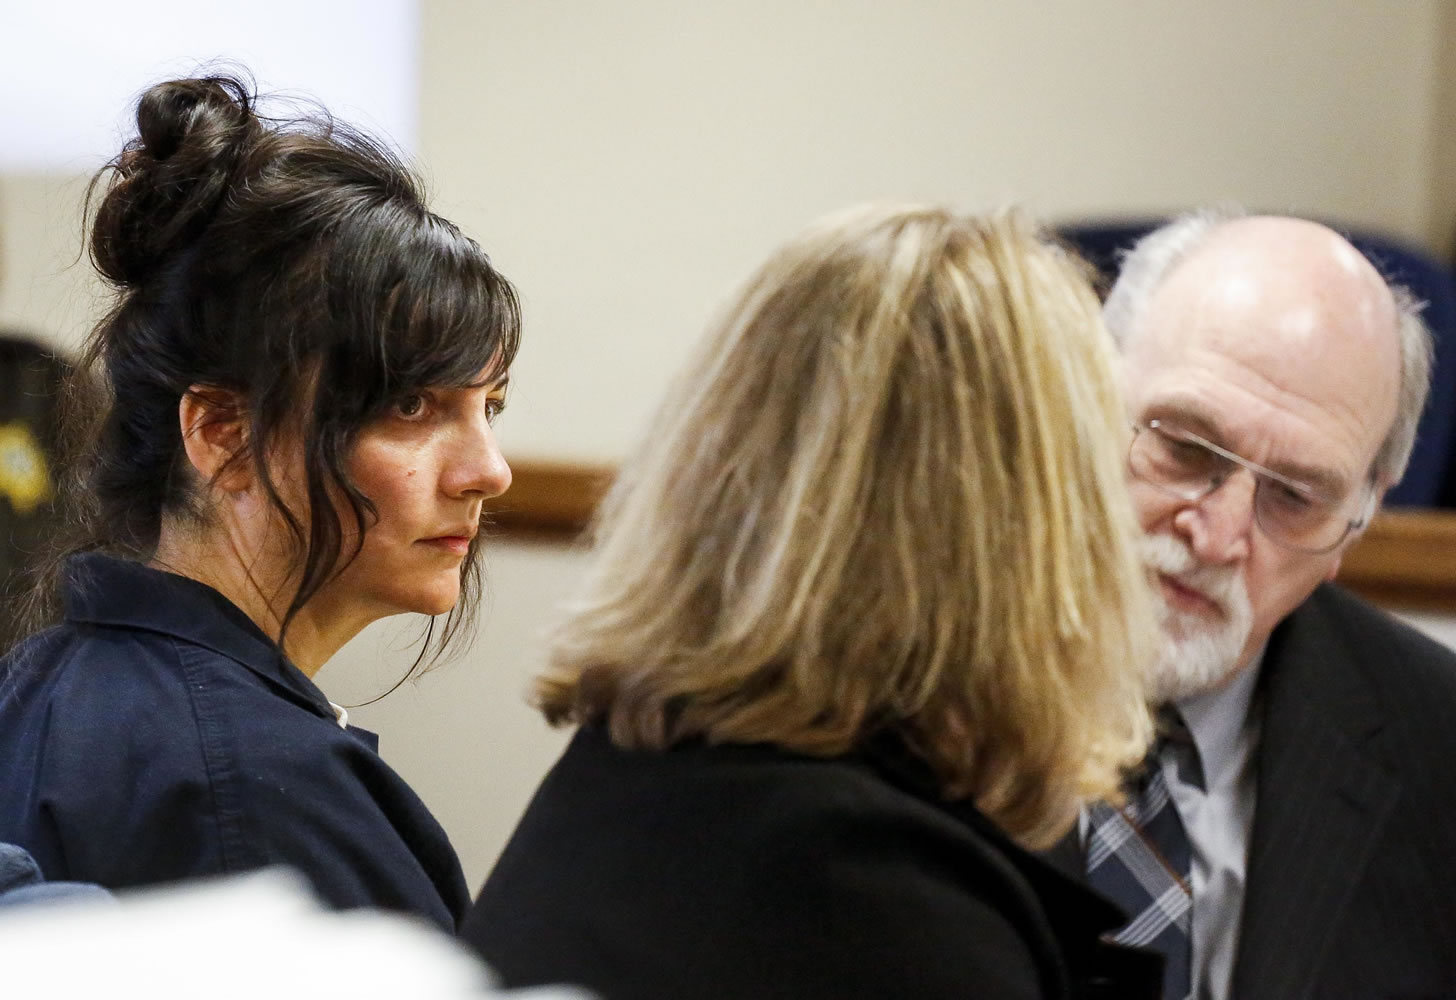 Jessica Smith, left, appears for a hearing alongside her attorneys Lynne Morgan, center, and William Falls, right, at the Clatsop County Courthouse on Jan. 14 in Astoria, Ore. Smith is charged with aggravated murder and attempted aggravated murder in the drowning death of her 2-year-old daughter and cutting the throat of her teenage daughter in Cannon Beach, Ore.